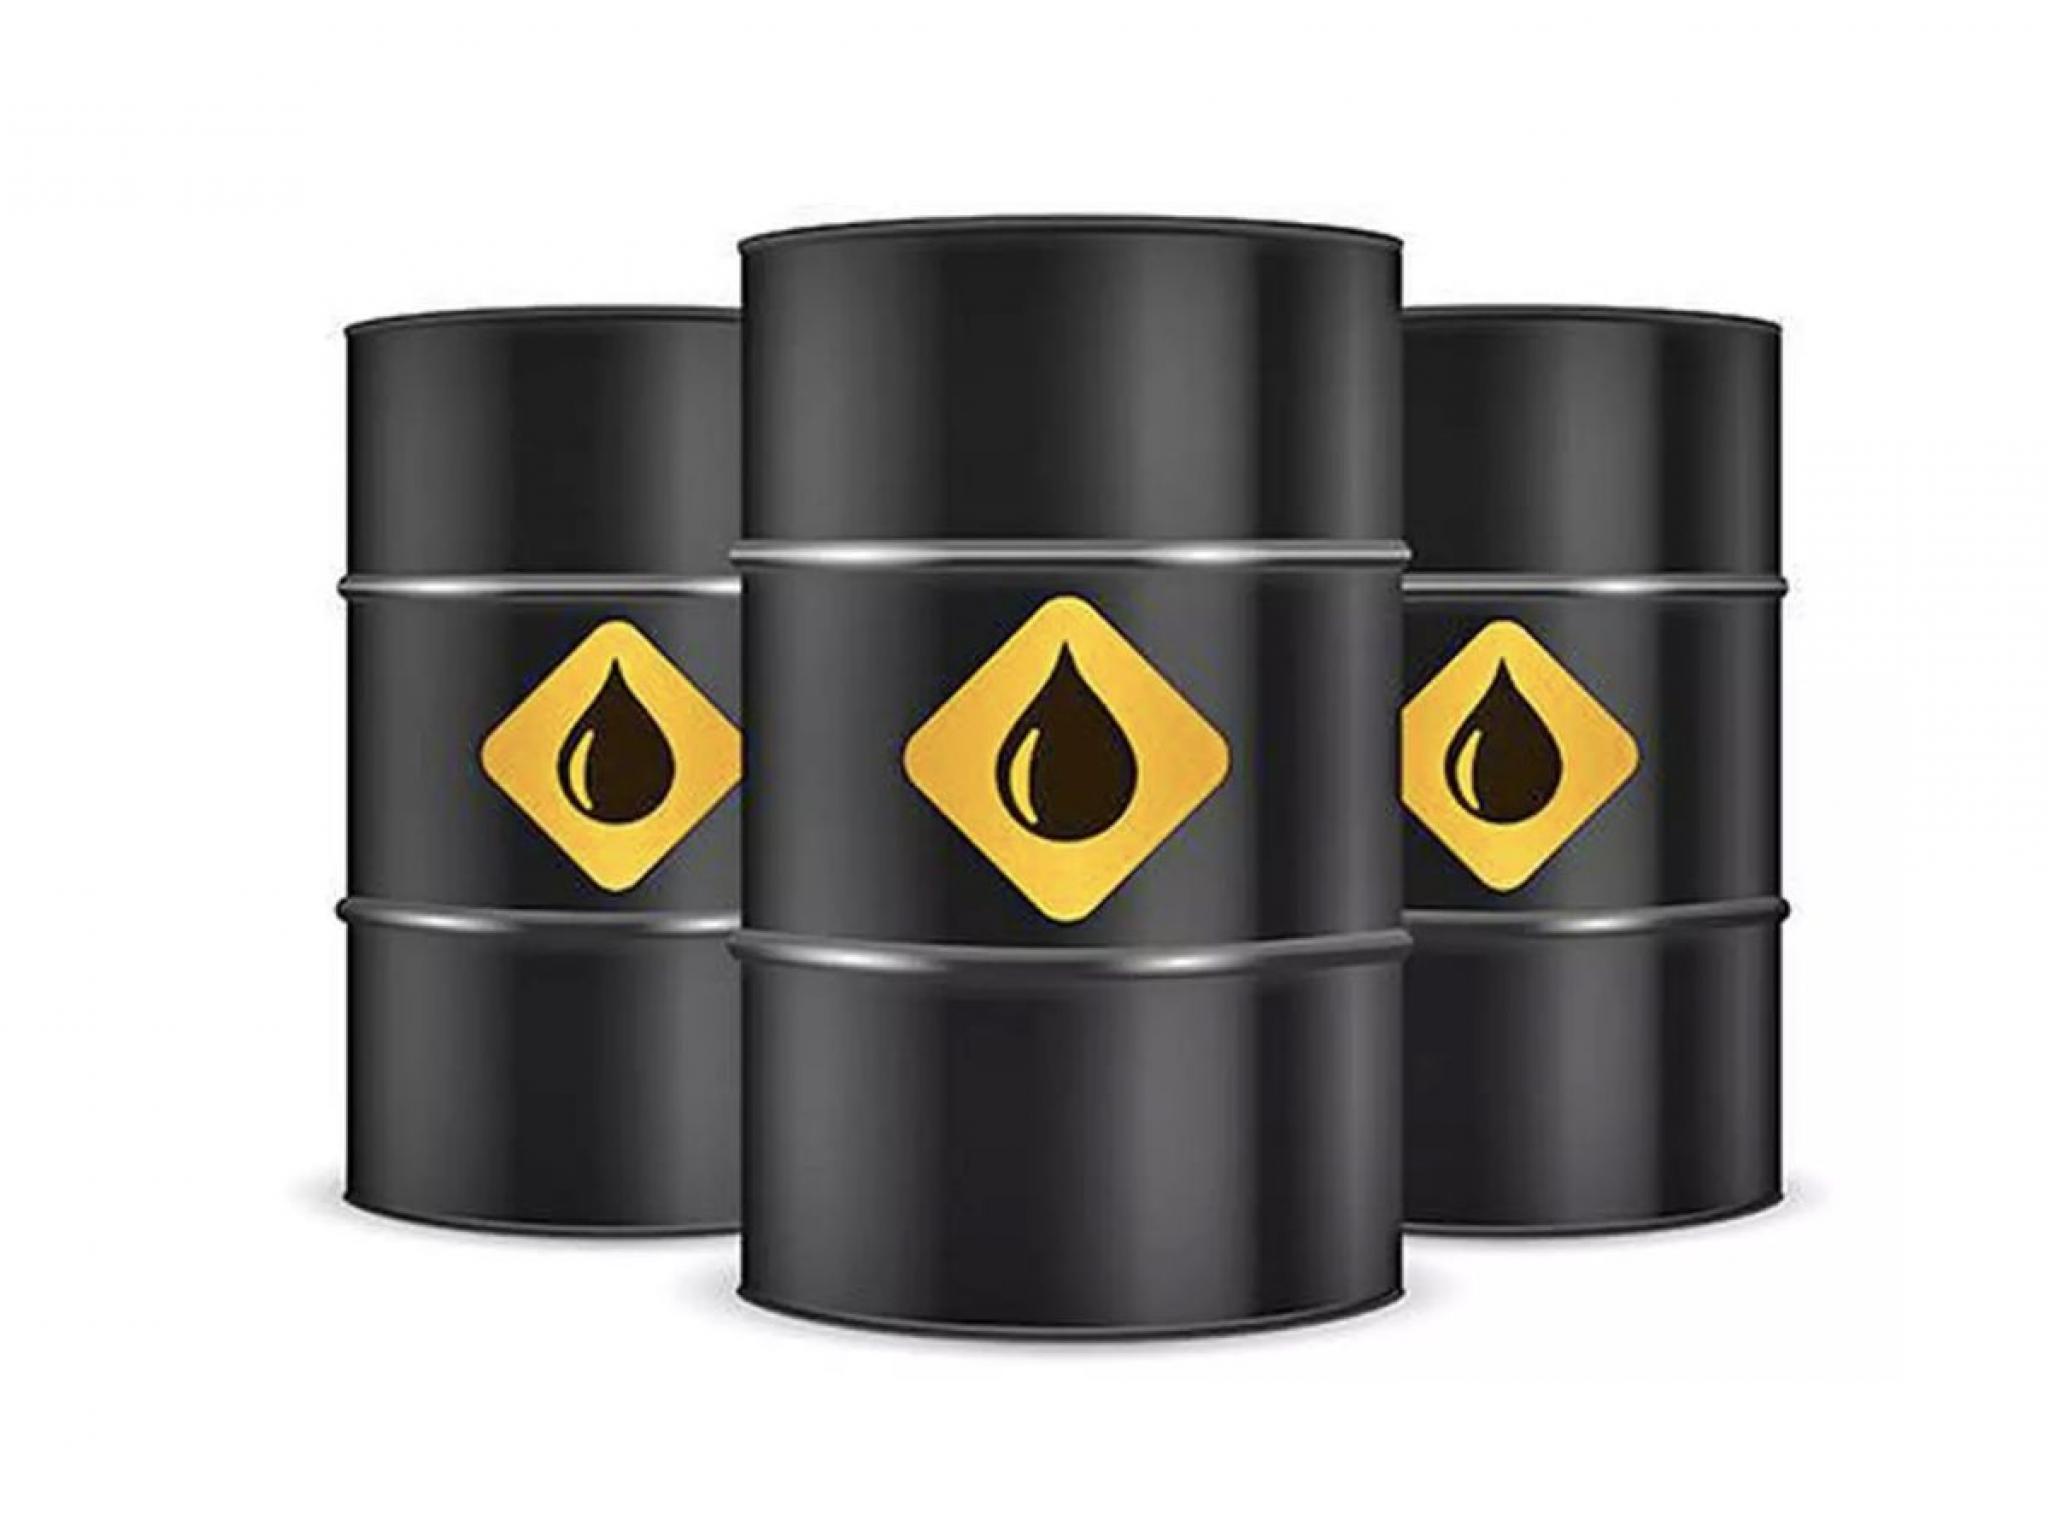  crude-oil-dips-2-signet-jewelers-shares-spike-higher 